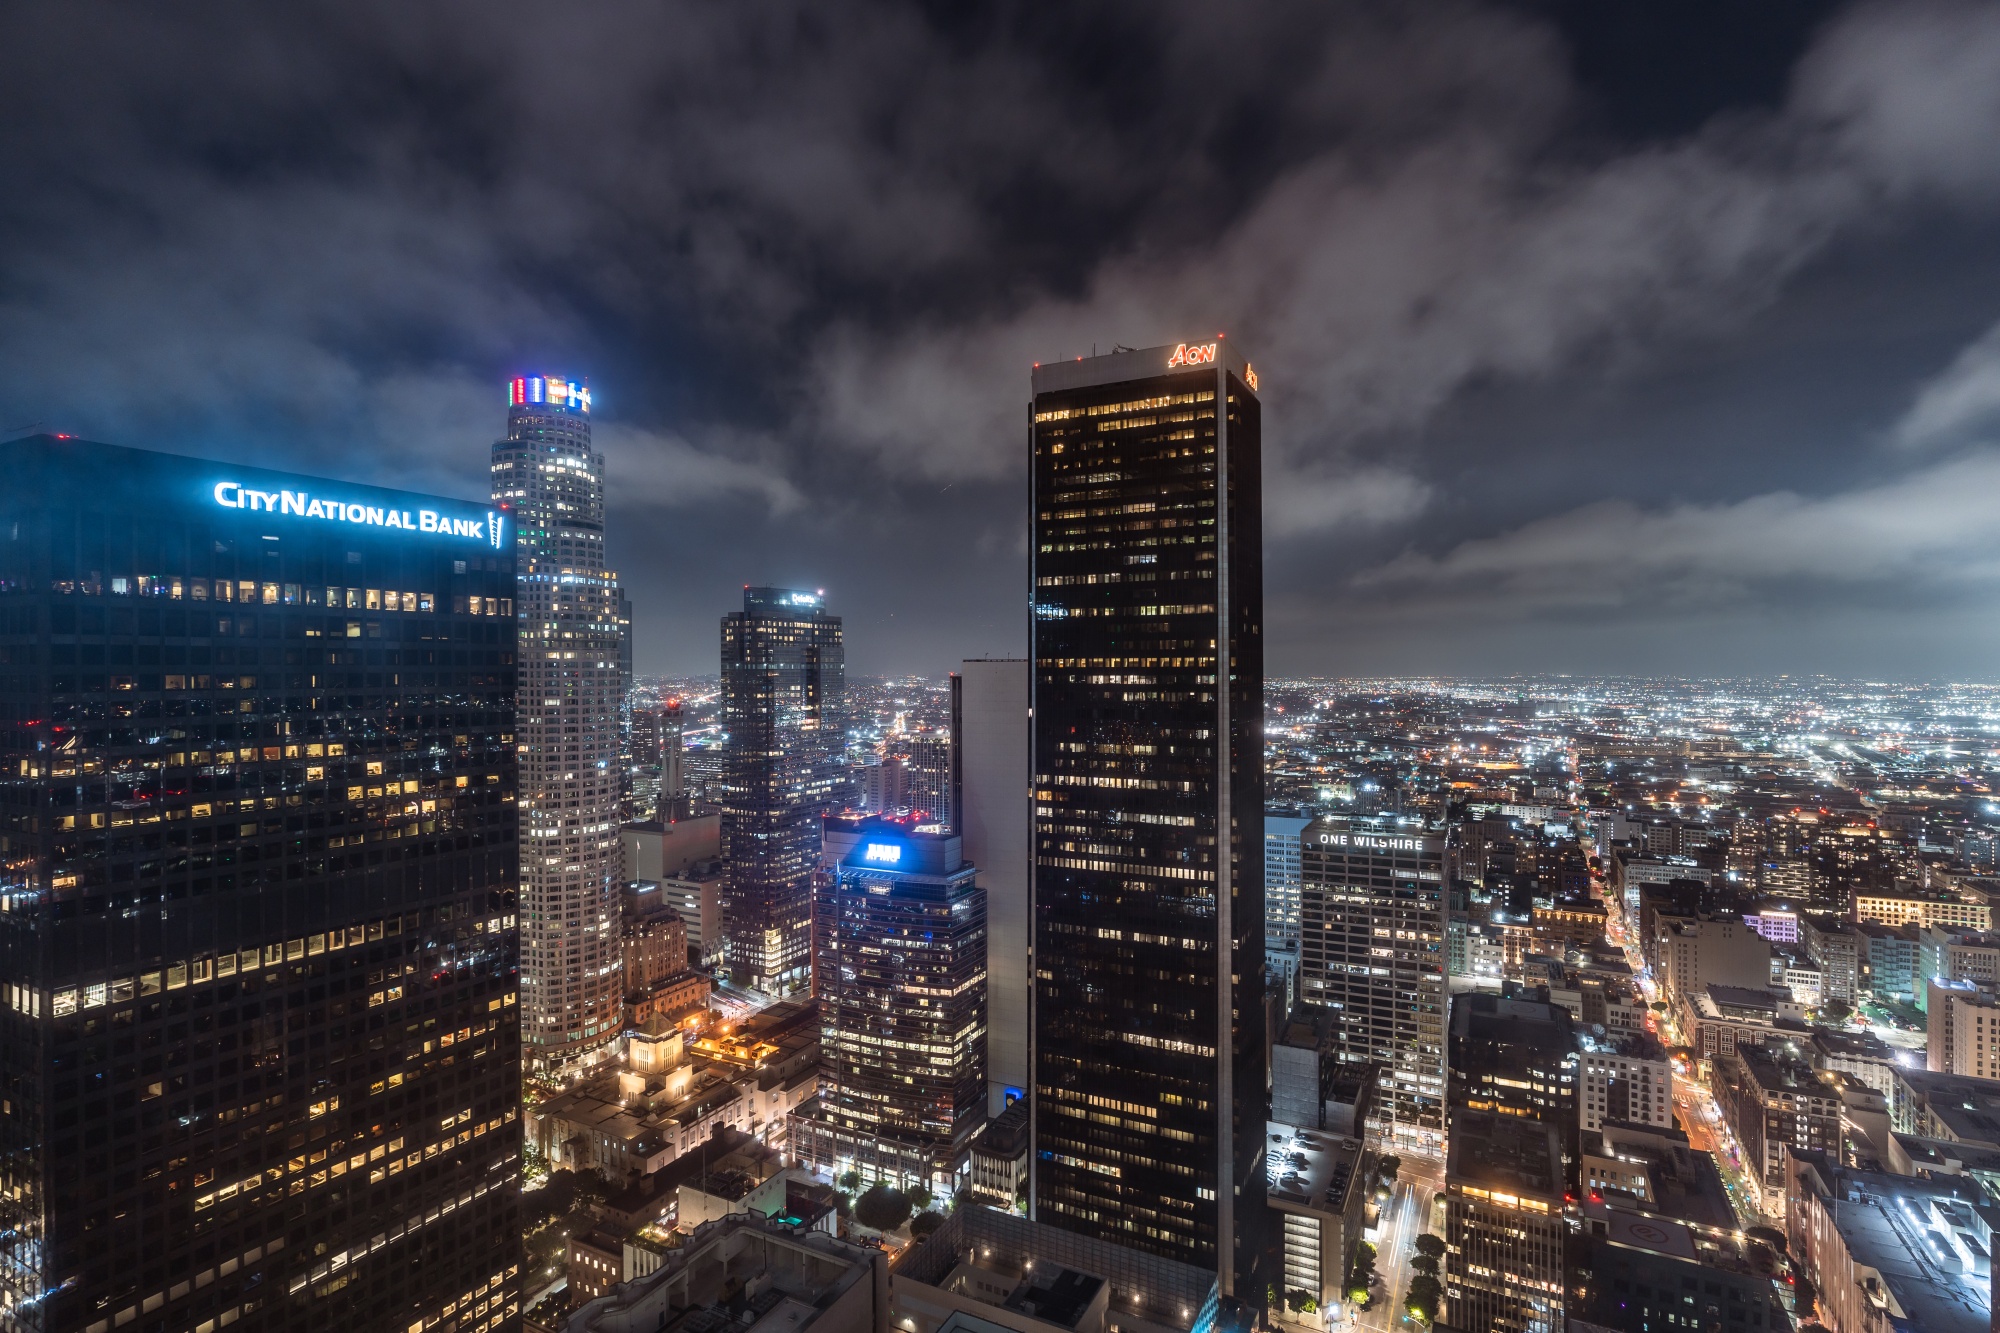 Aon Center, the third-tallest tower in Los Angeles, sold for $147.8 million — about 45% less than its last purchase price in 2014.